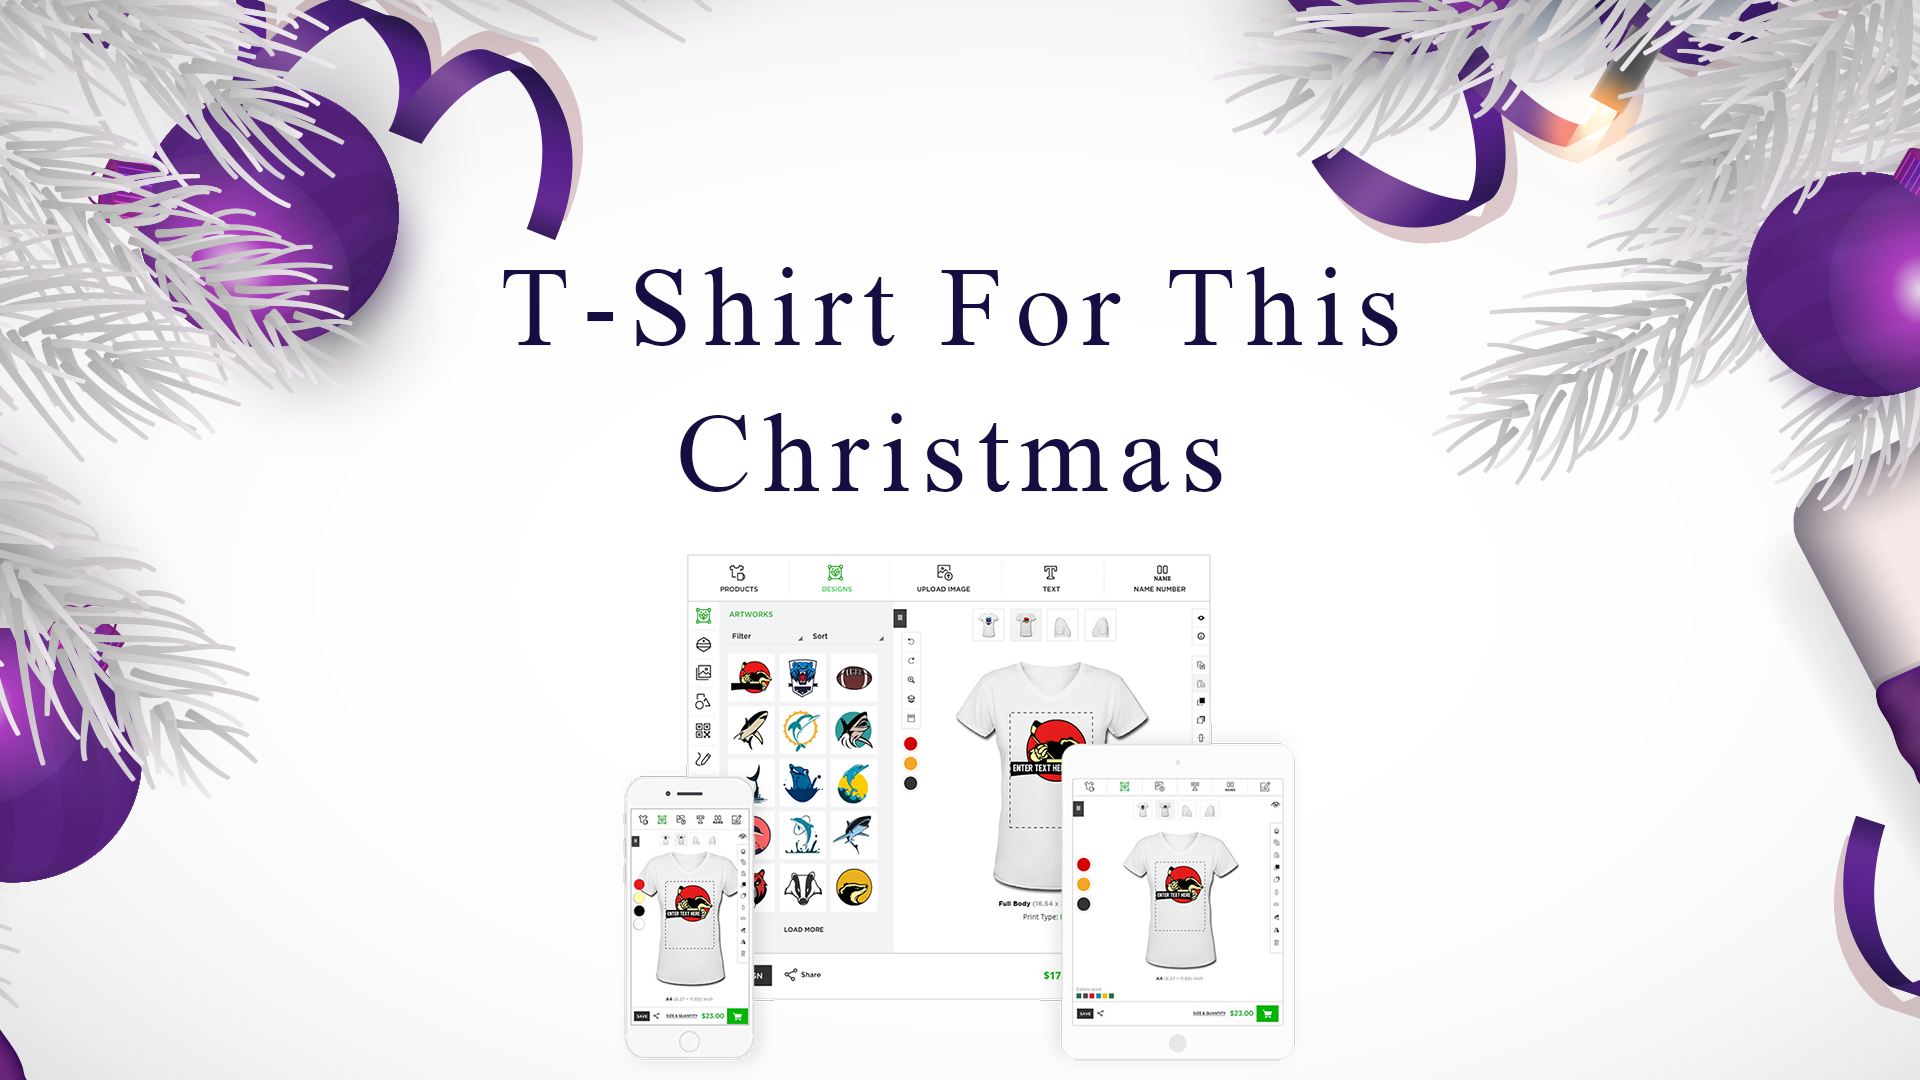 Create A Personalized T-shirt For this Christmas Eve